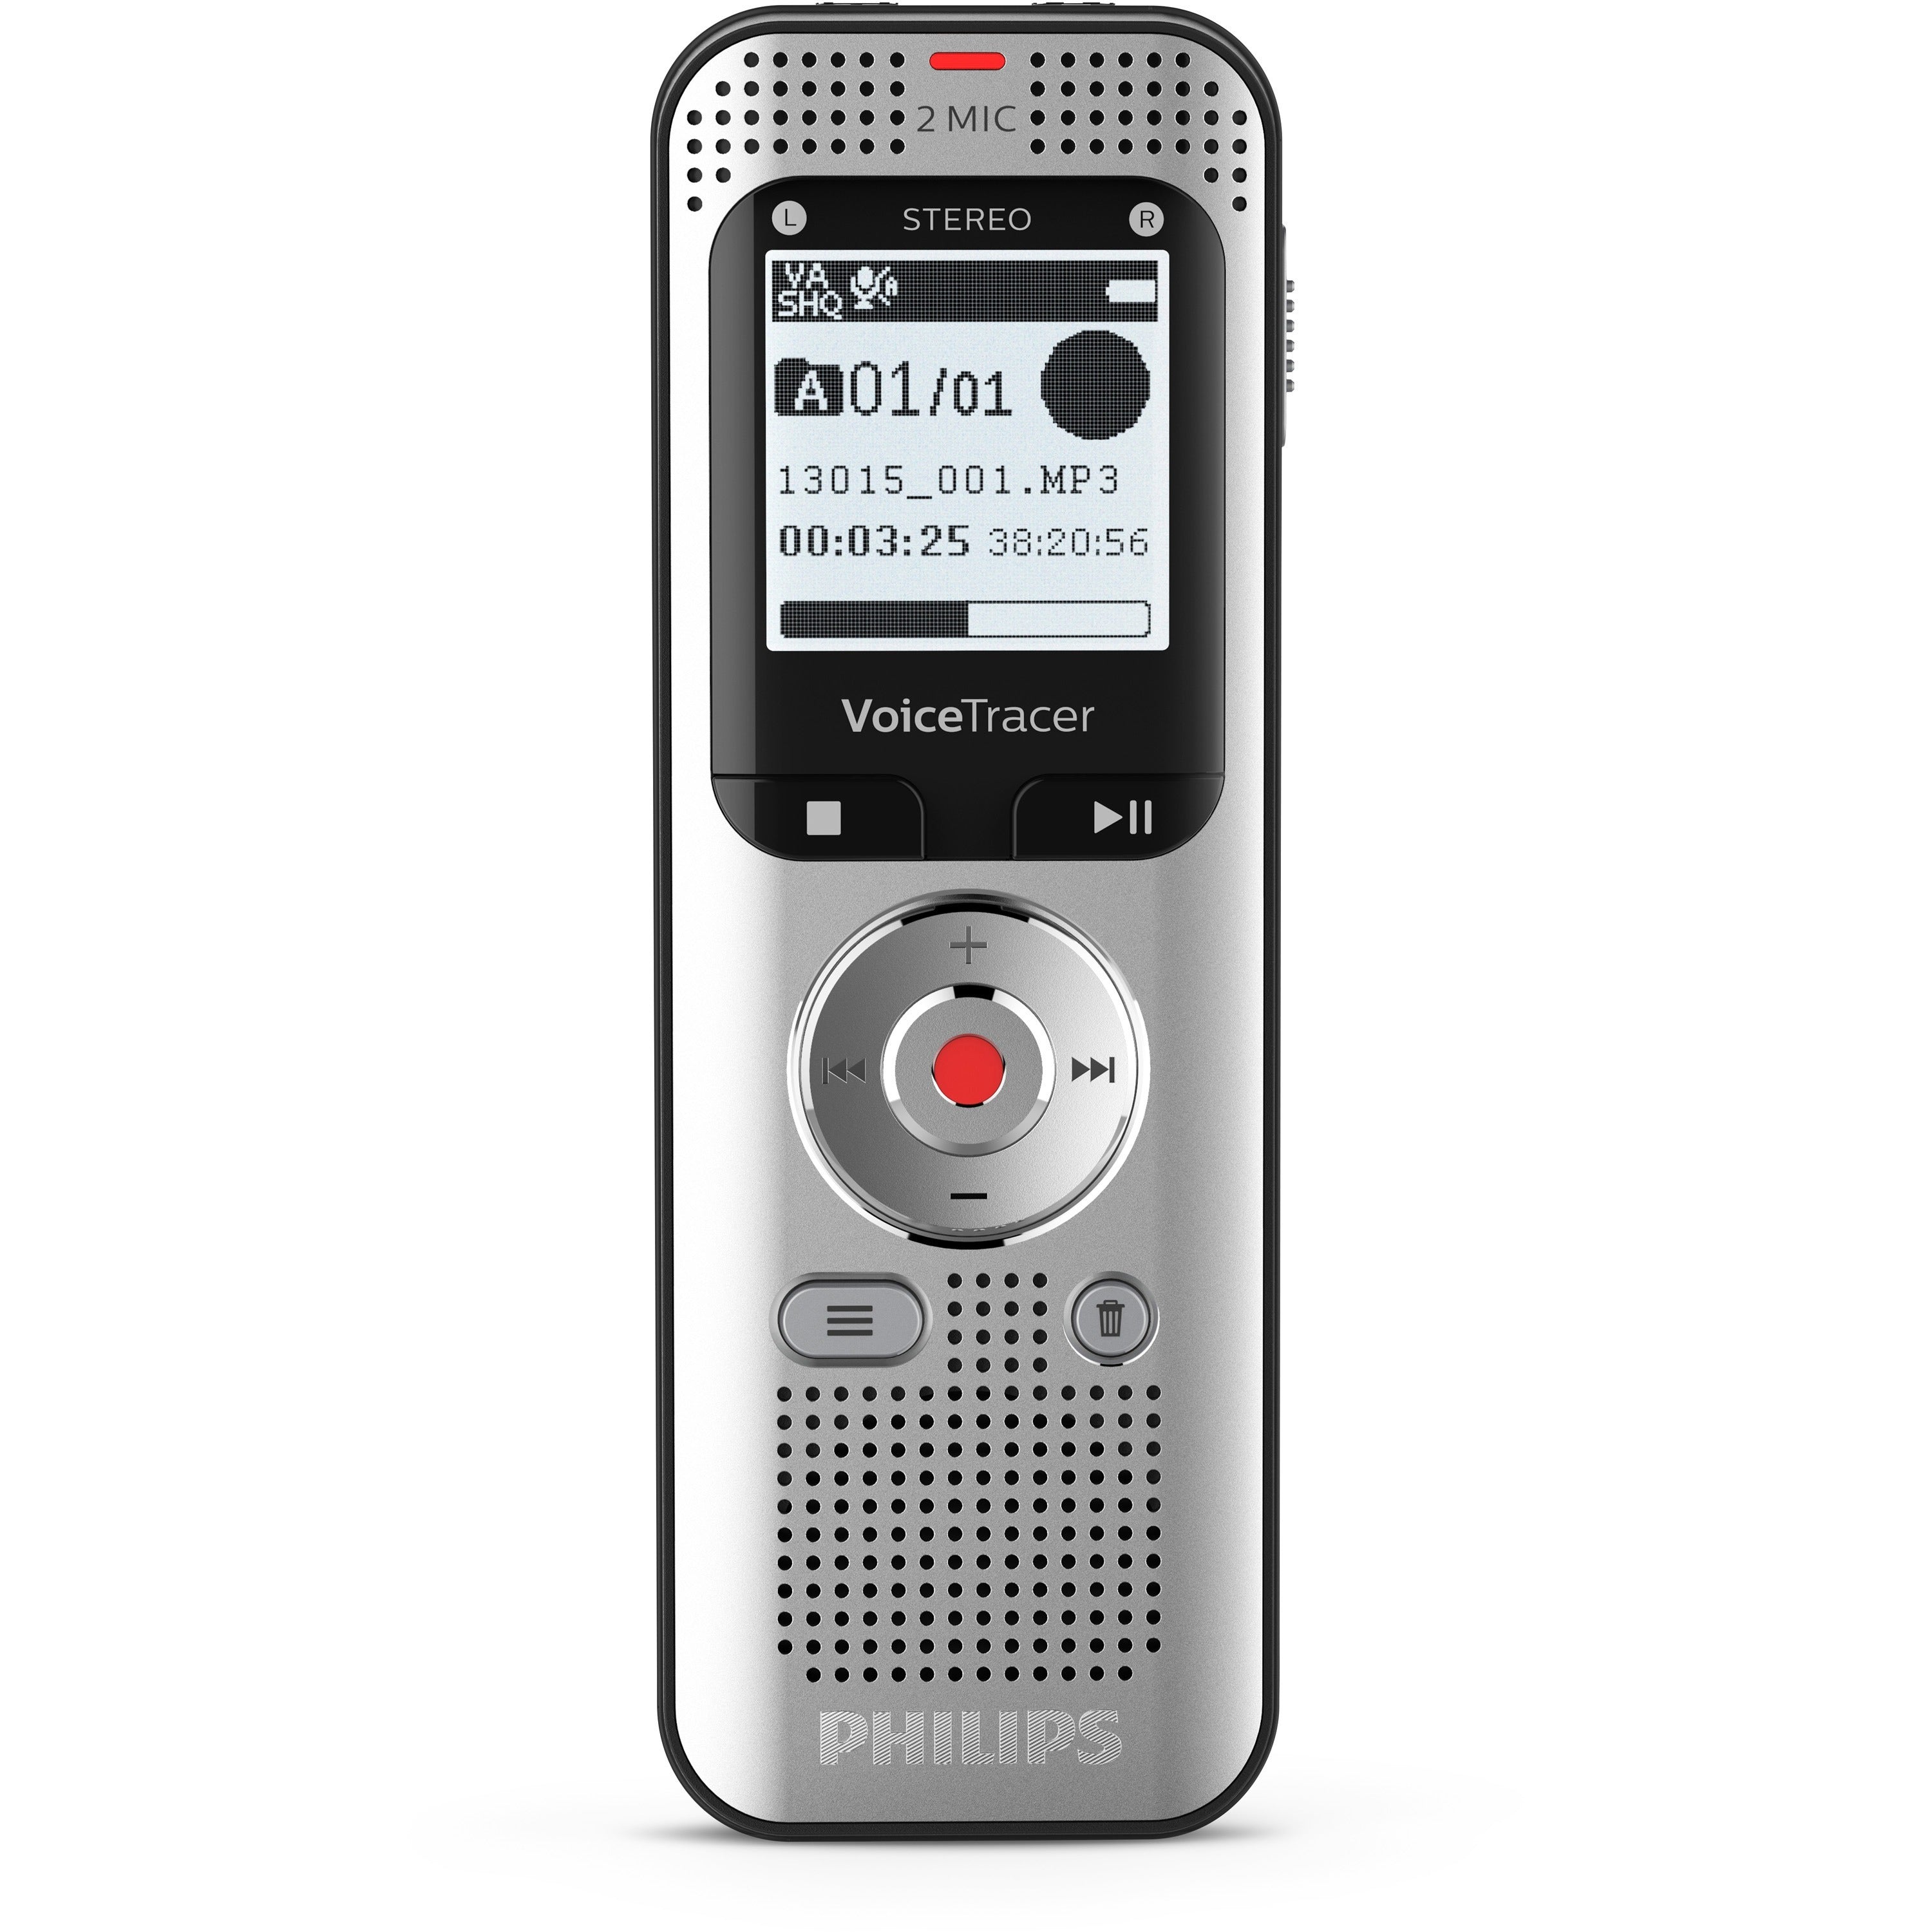 philips-voicetracer-dvt2050-audio-recorder-8gb-memory-microsd-supported-13-lcd-backlit-display-up-to-50-hours-recording-rechargeable-pc-and-mac-compatible_pspdvt2050 - 1